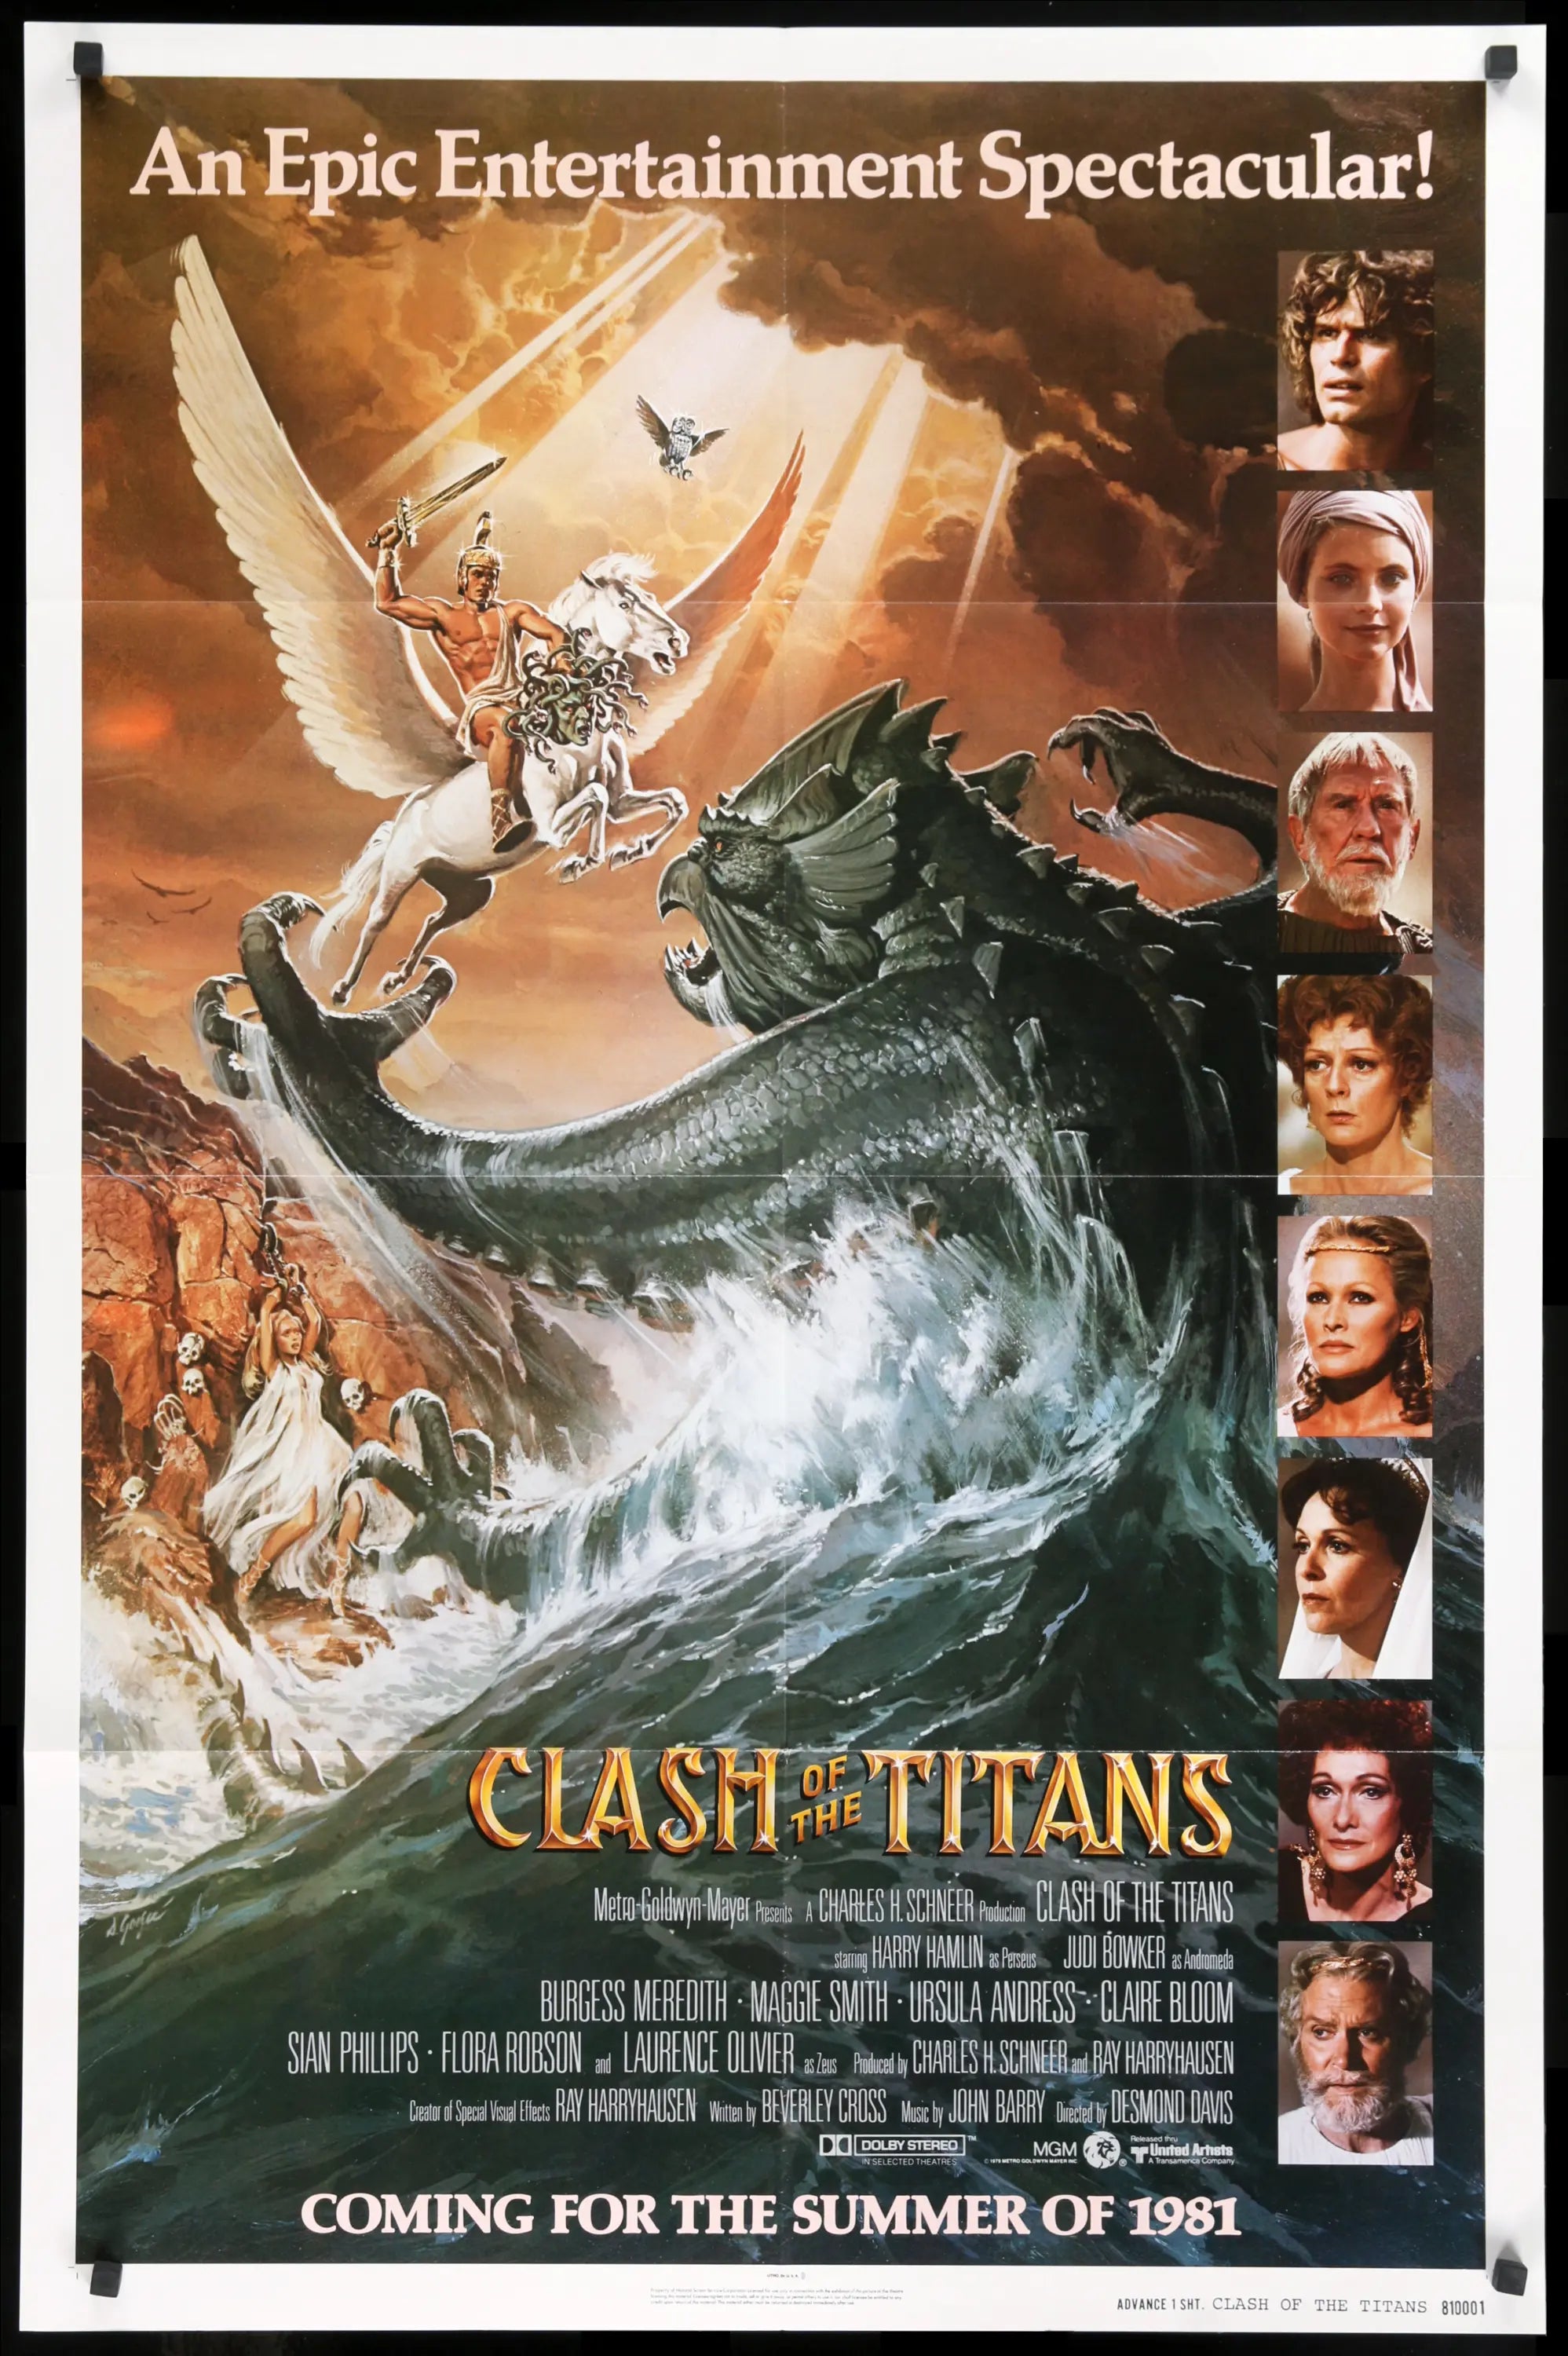 Pictures & Photos from Clash of the Titans - IMDb